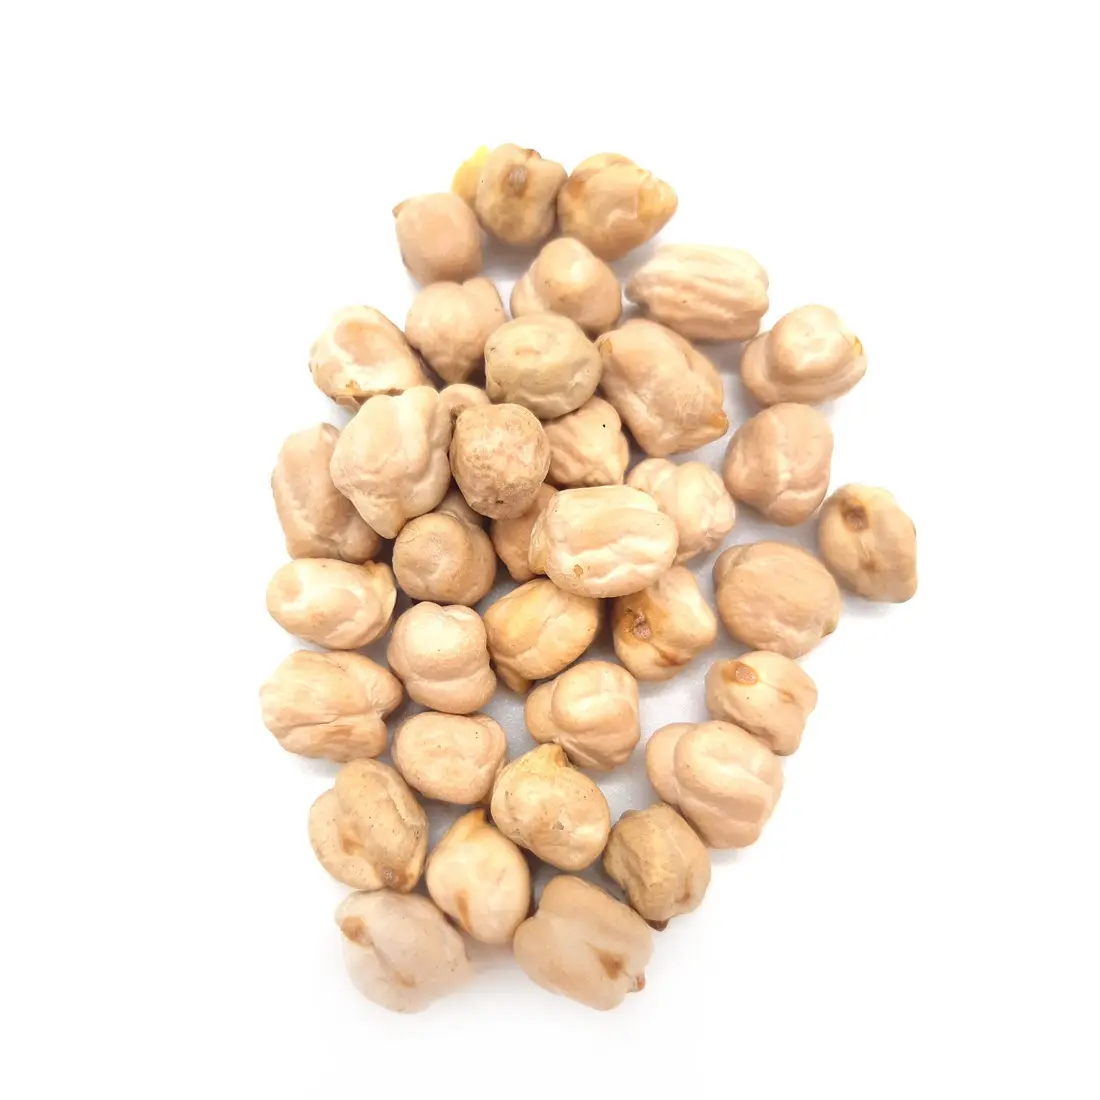 Good Quality Chickpeas for sale